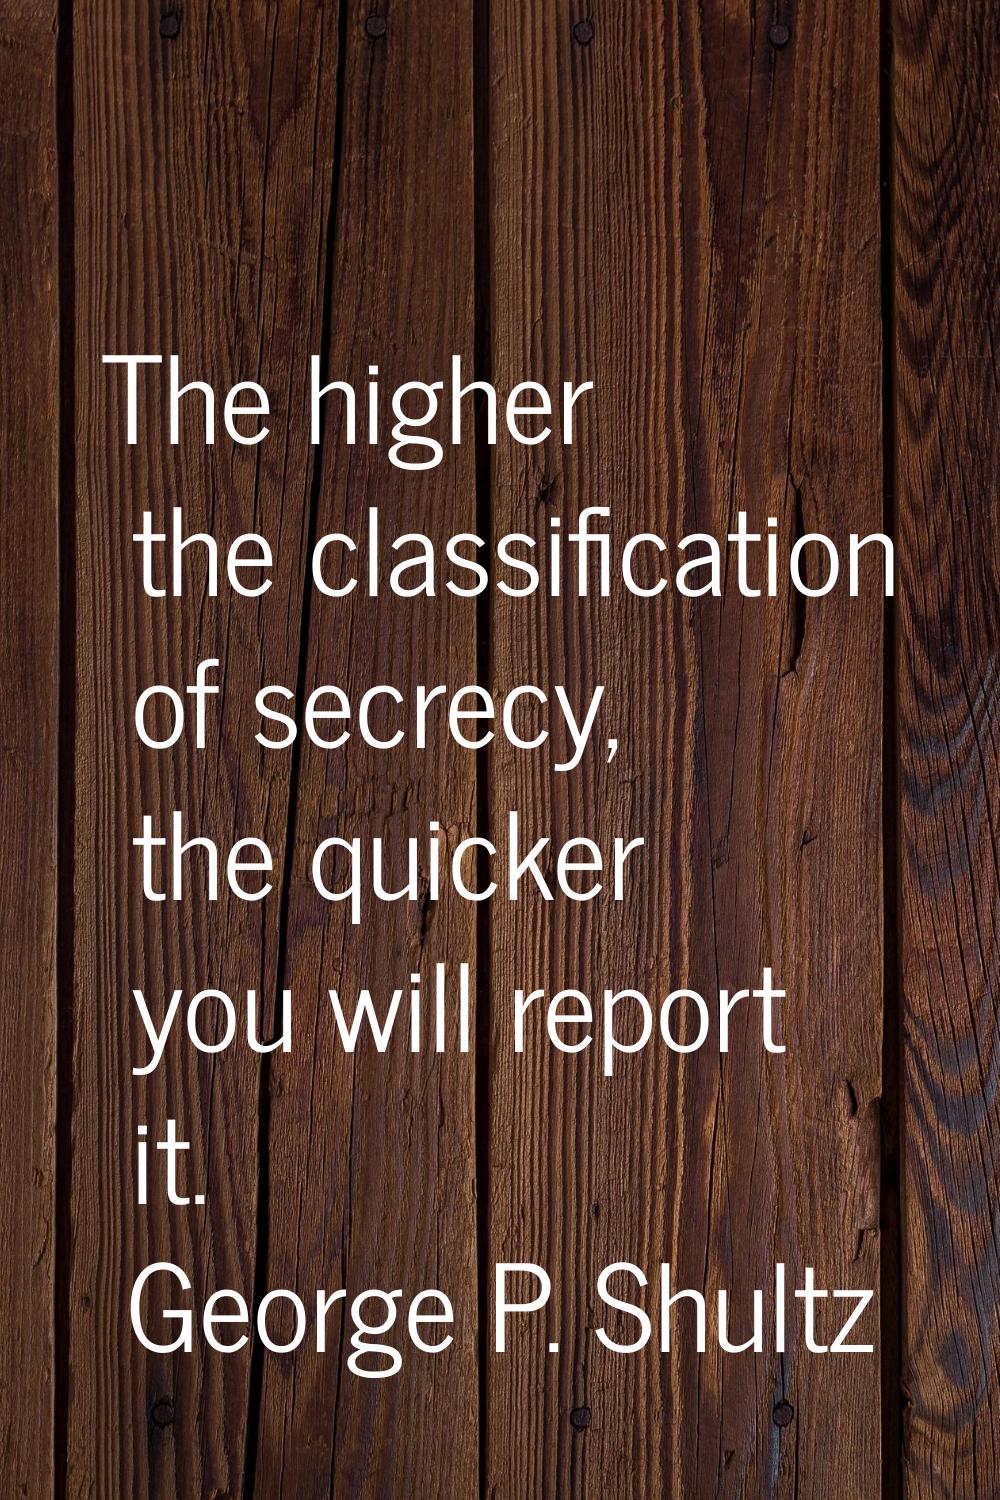 The higher the classification of secrecy, the quicker you will report it.